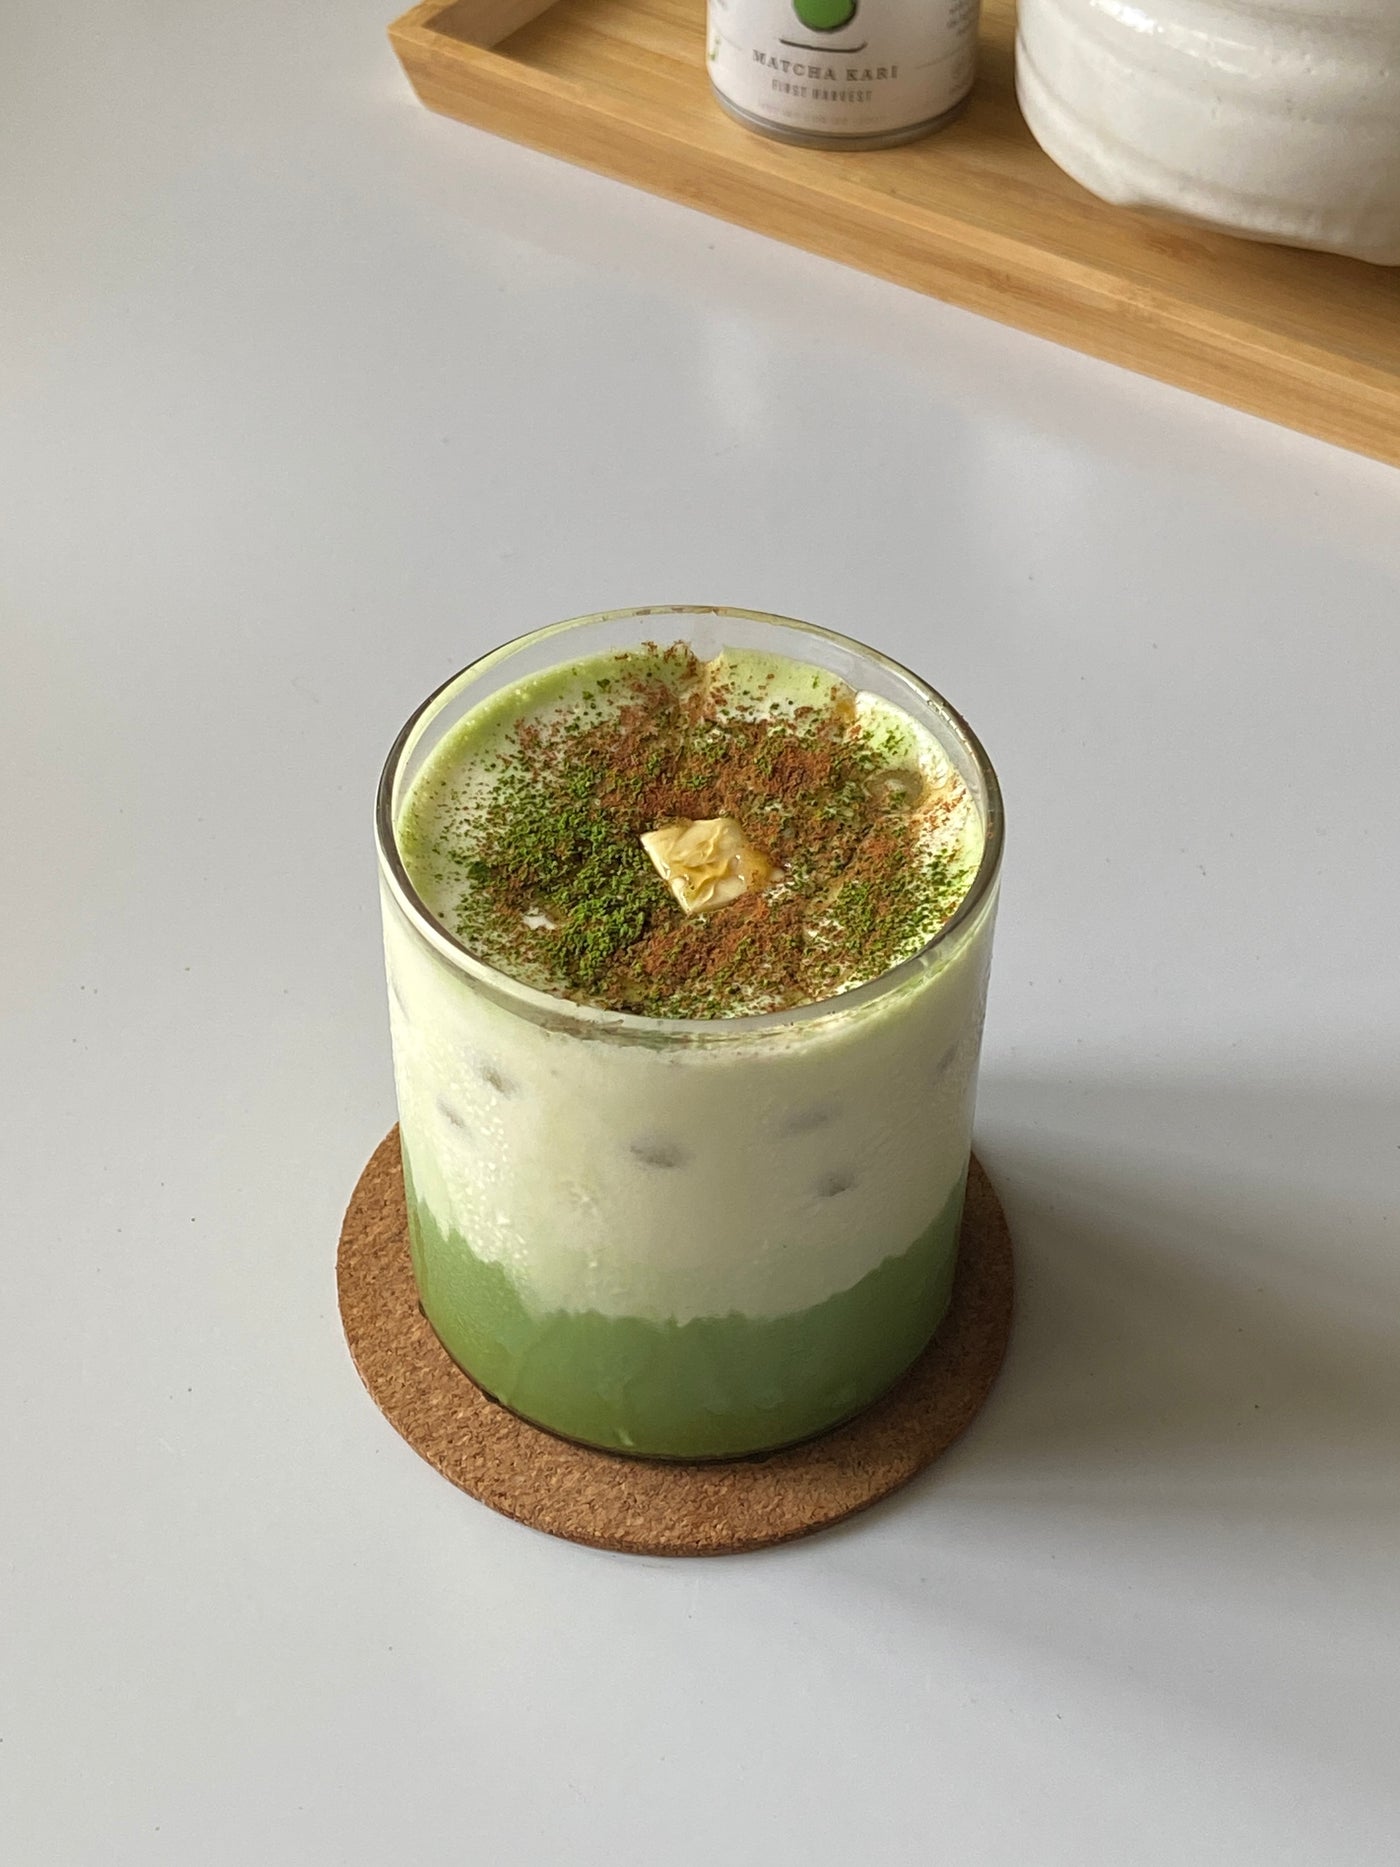 french toast matcha latte:  The combination of cinnamon and matcha offers a powerful duo of health benefits, including enhanced metabolism, improved blood sugar control, antioxidant protection, and potential anti-inflammatory effects.